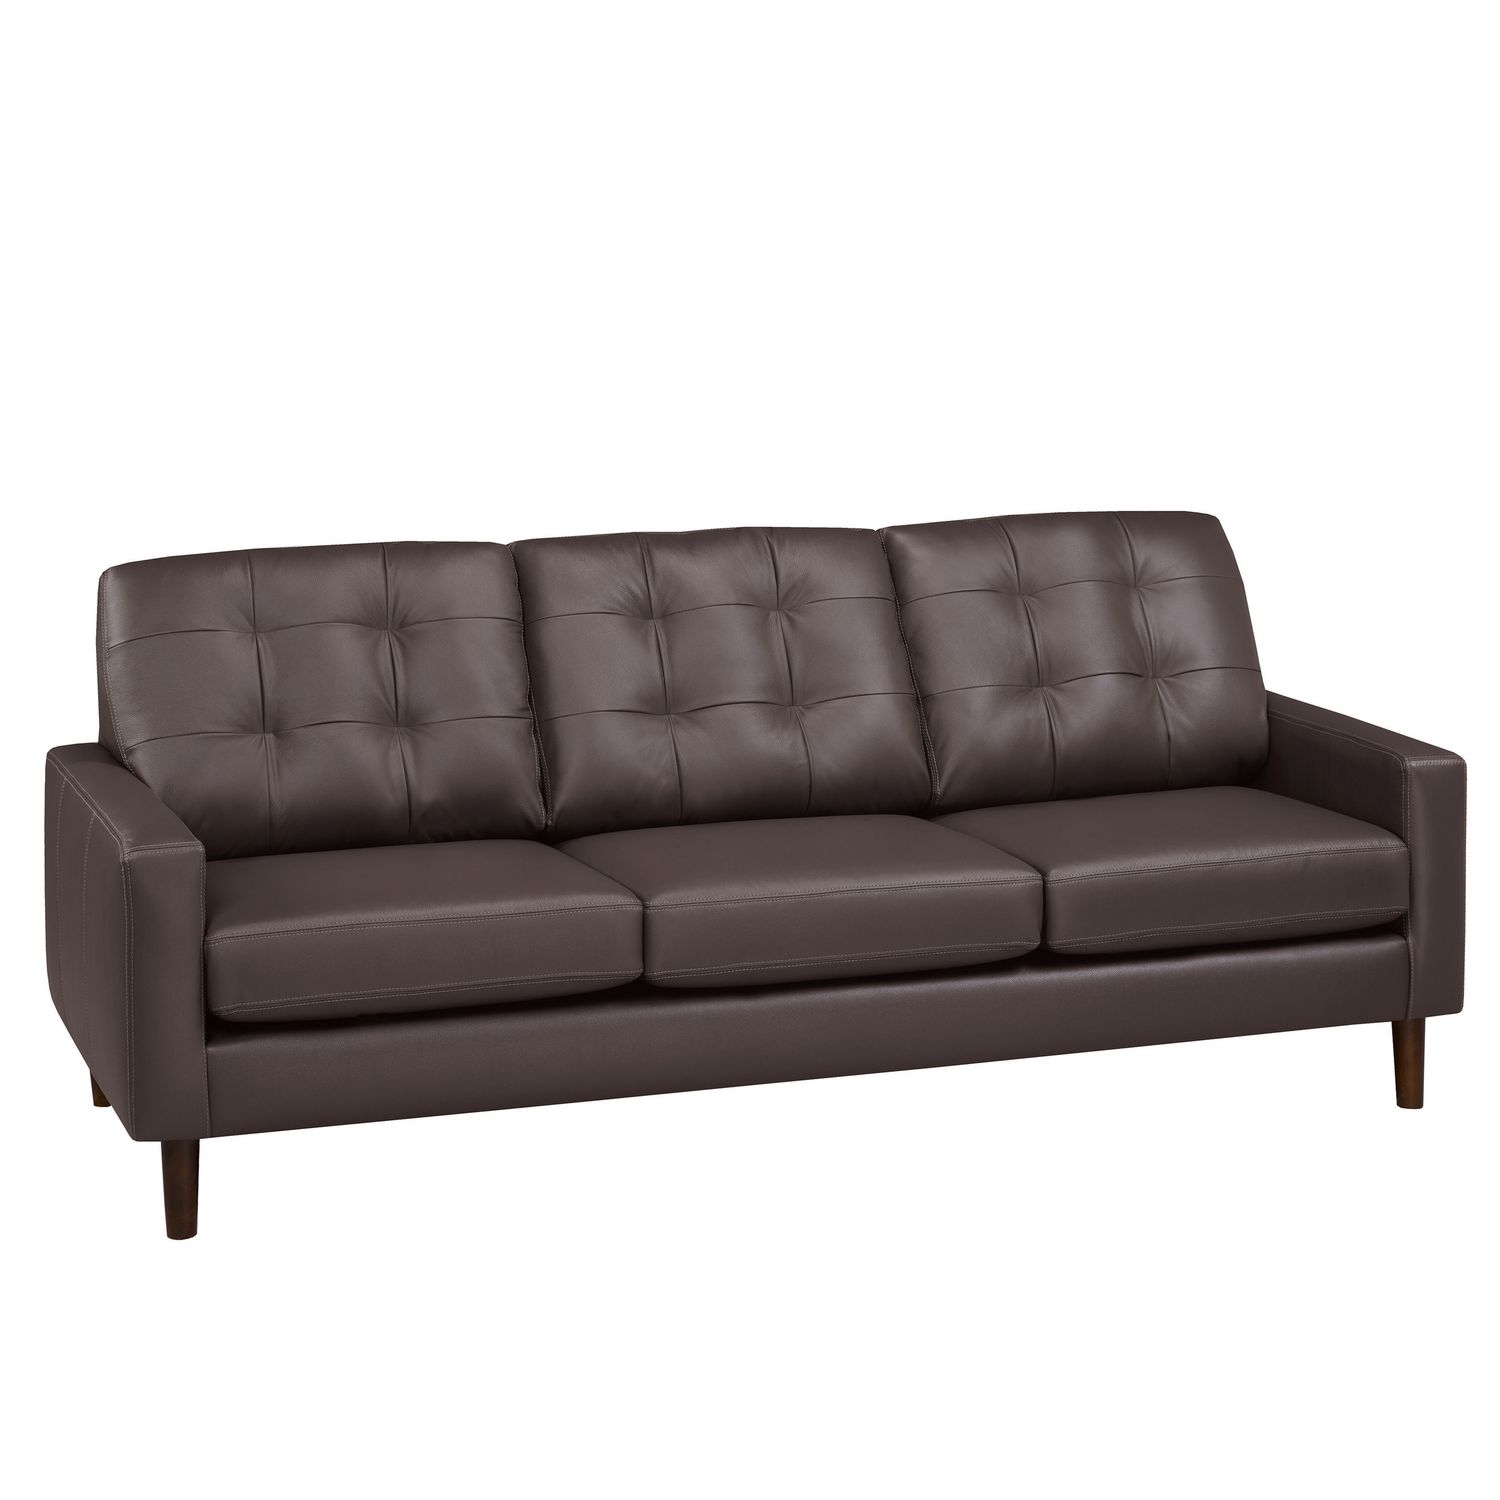 Alanis Leather Sofa Canada, Best Canadian Made Leather Sofas